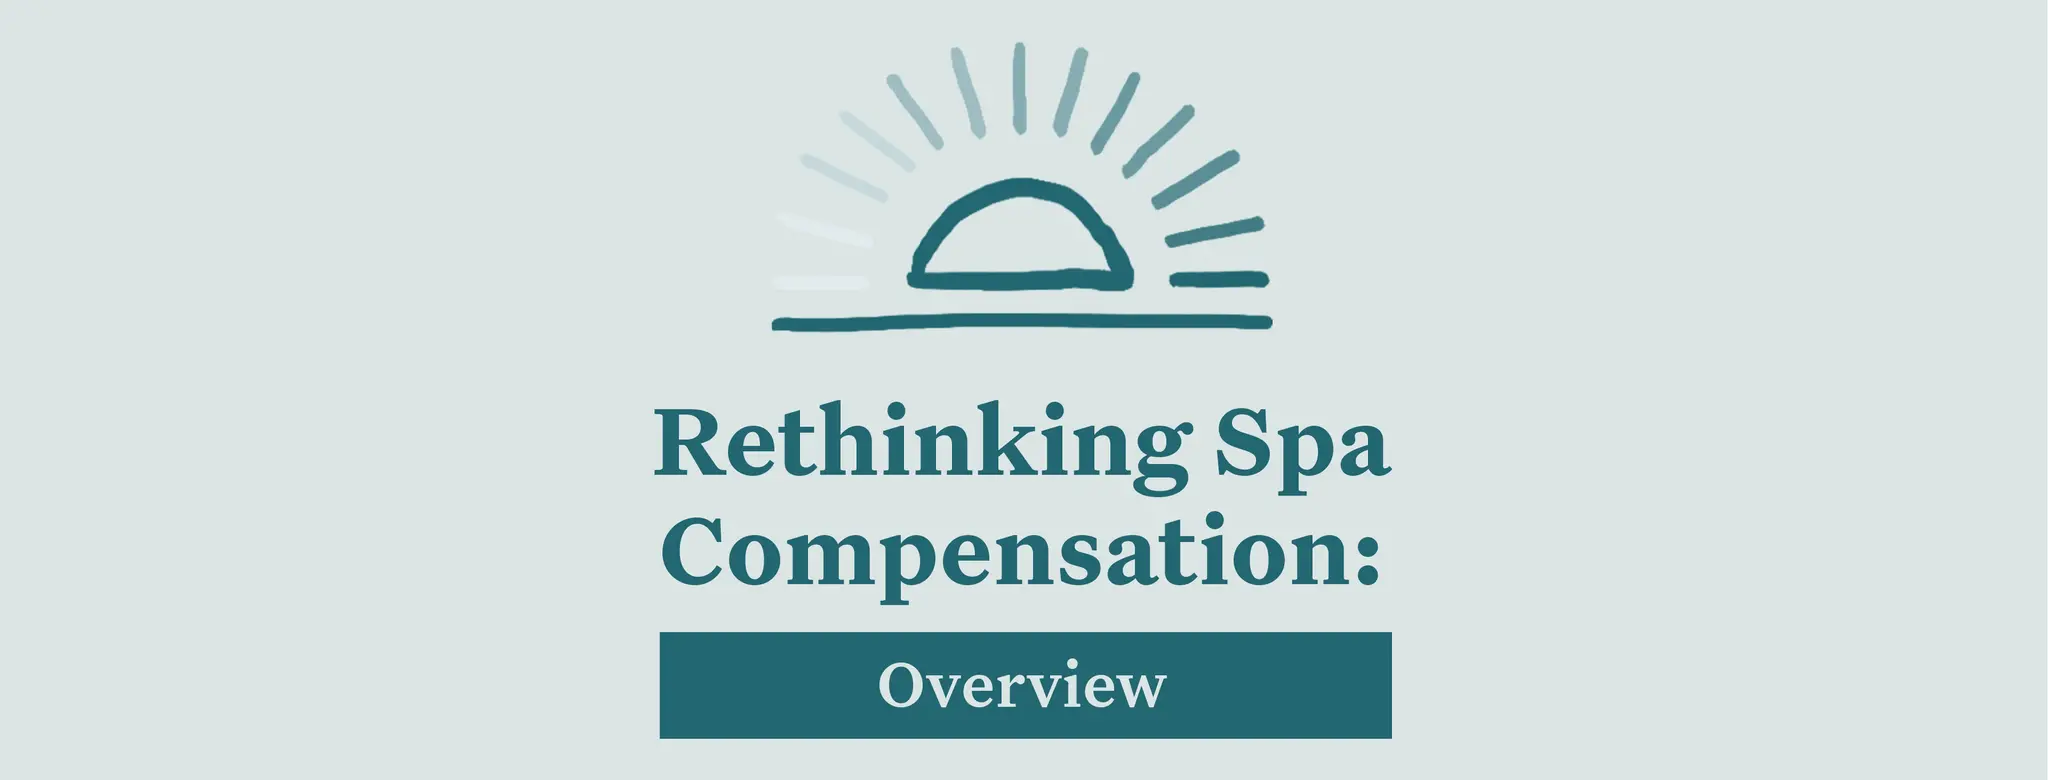 Rethinking Spa Compensation: Overview